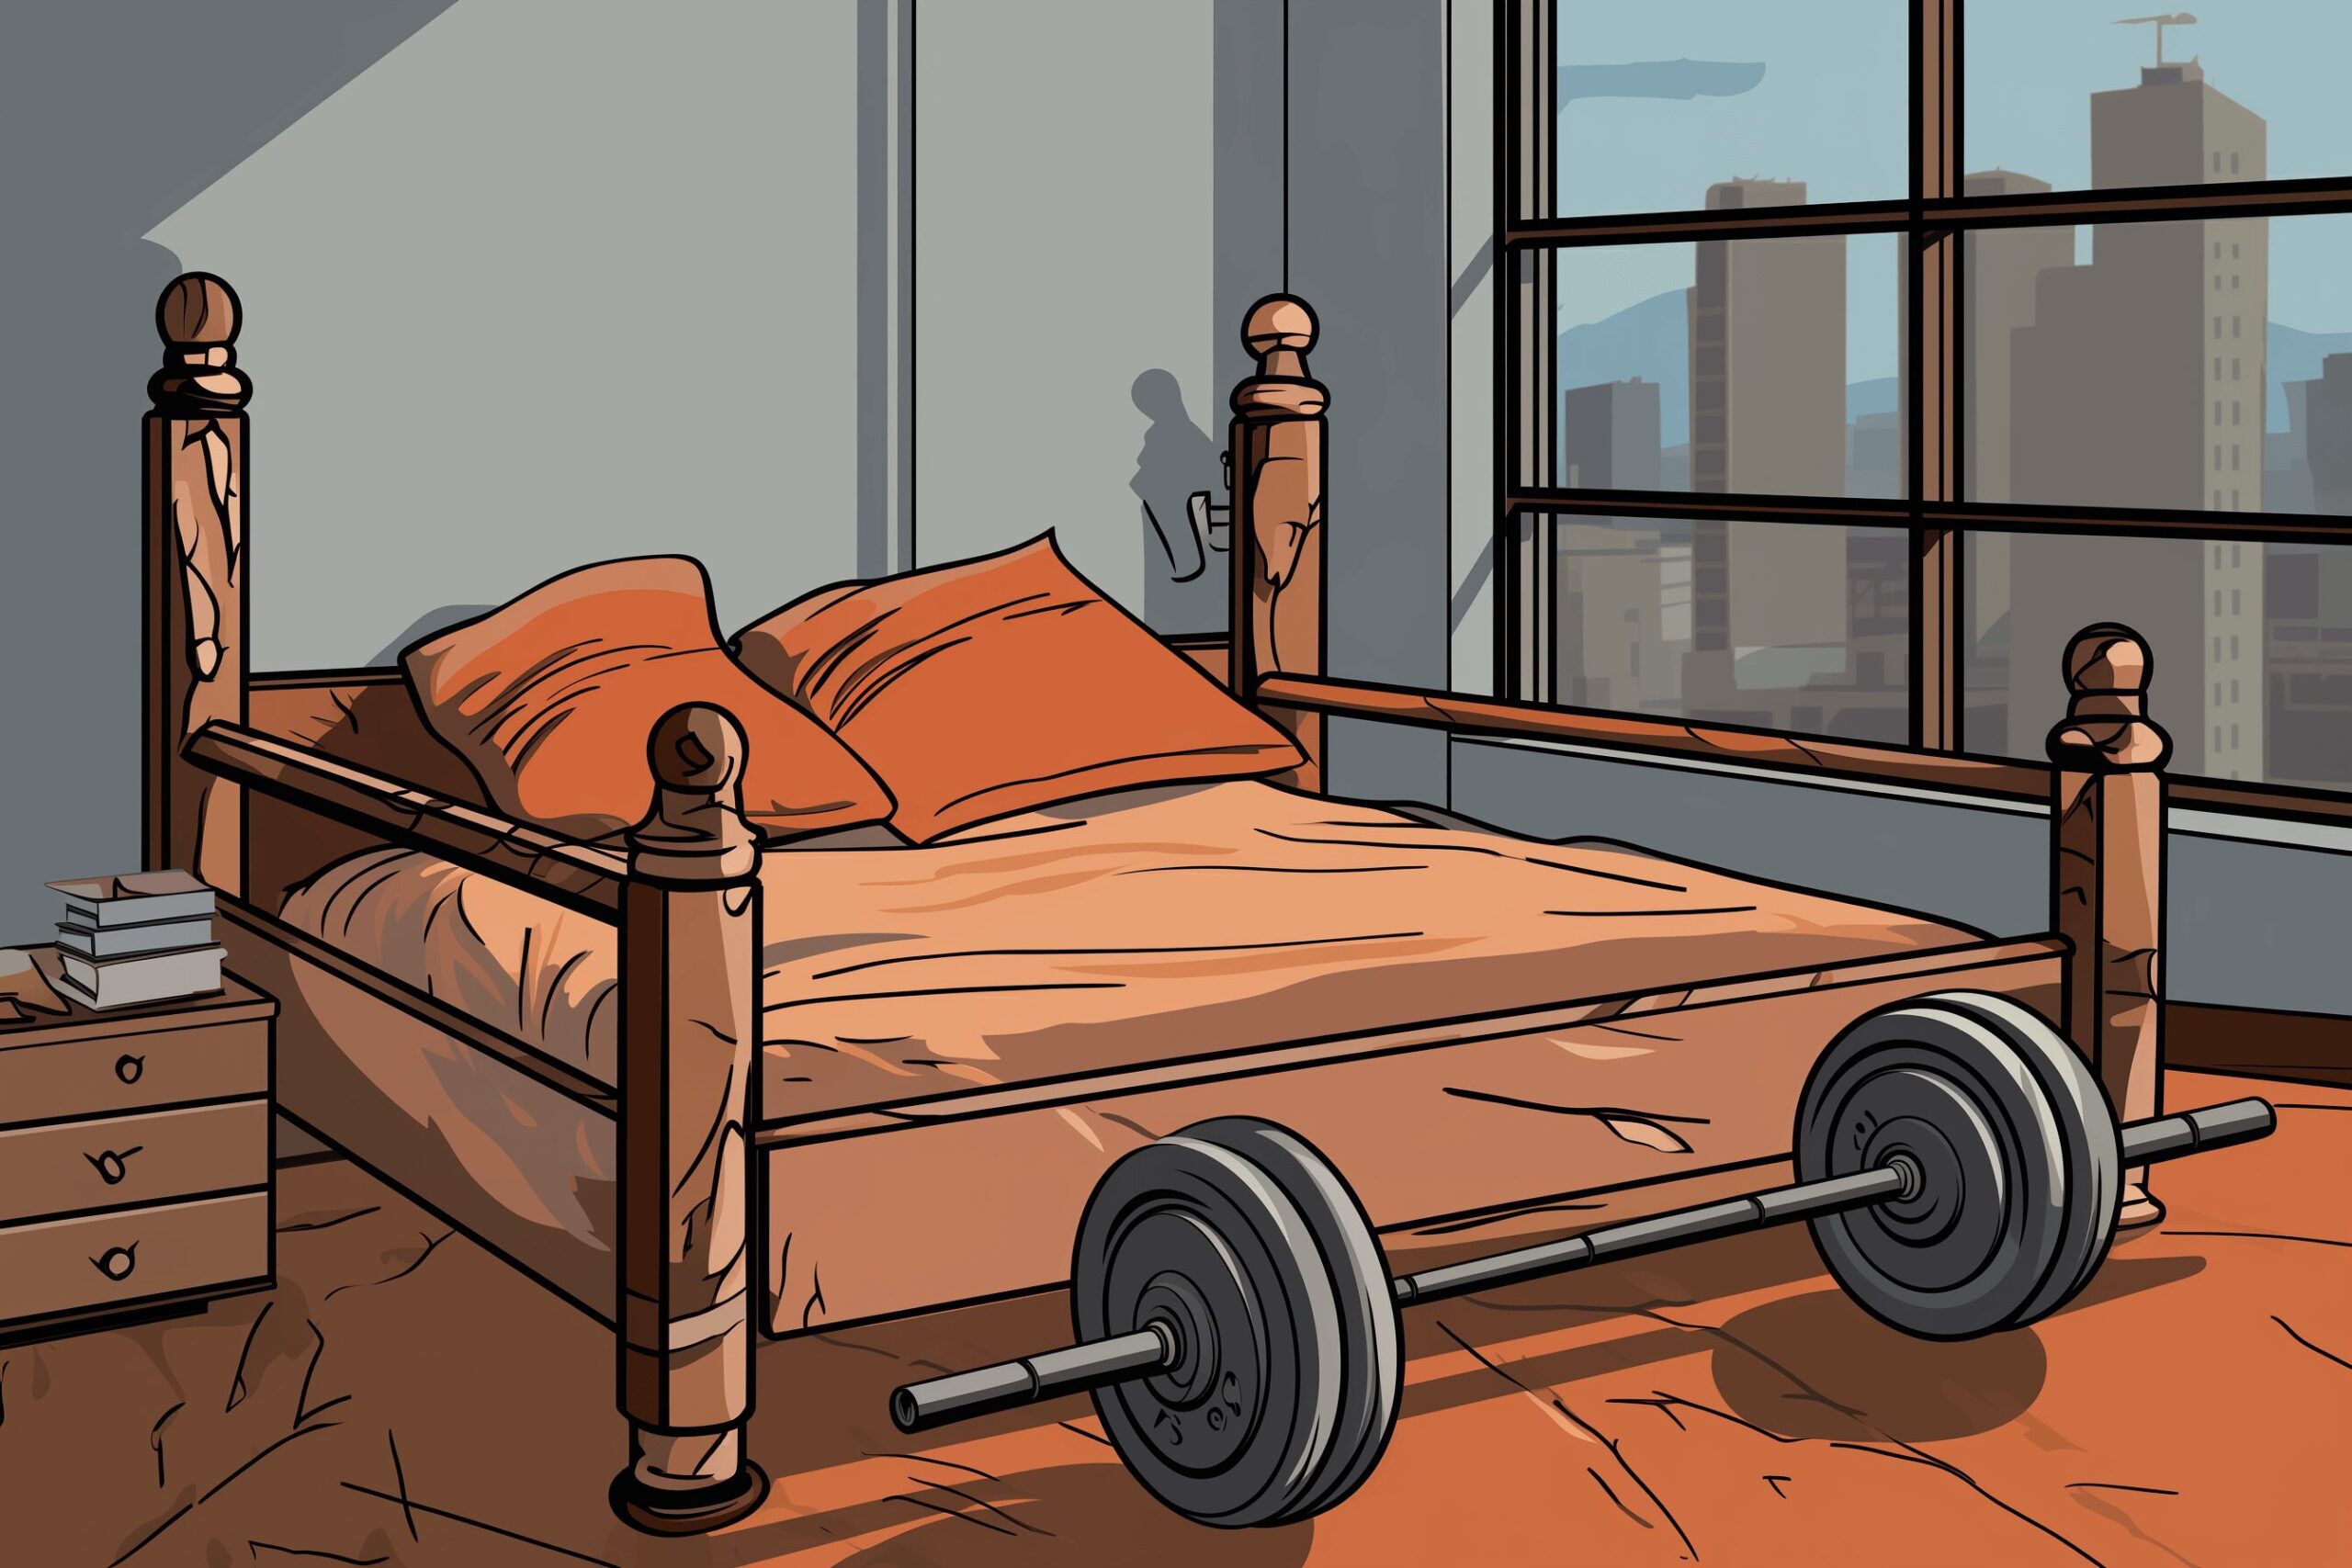 a barbell at the foot of a bed